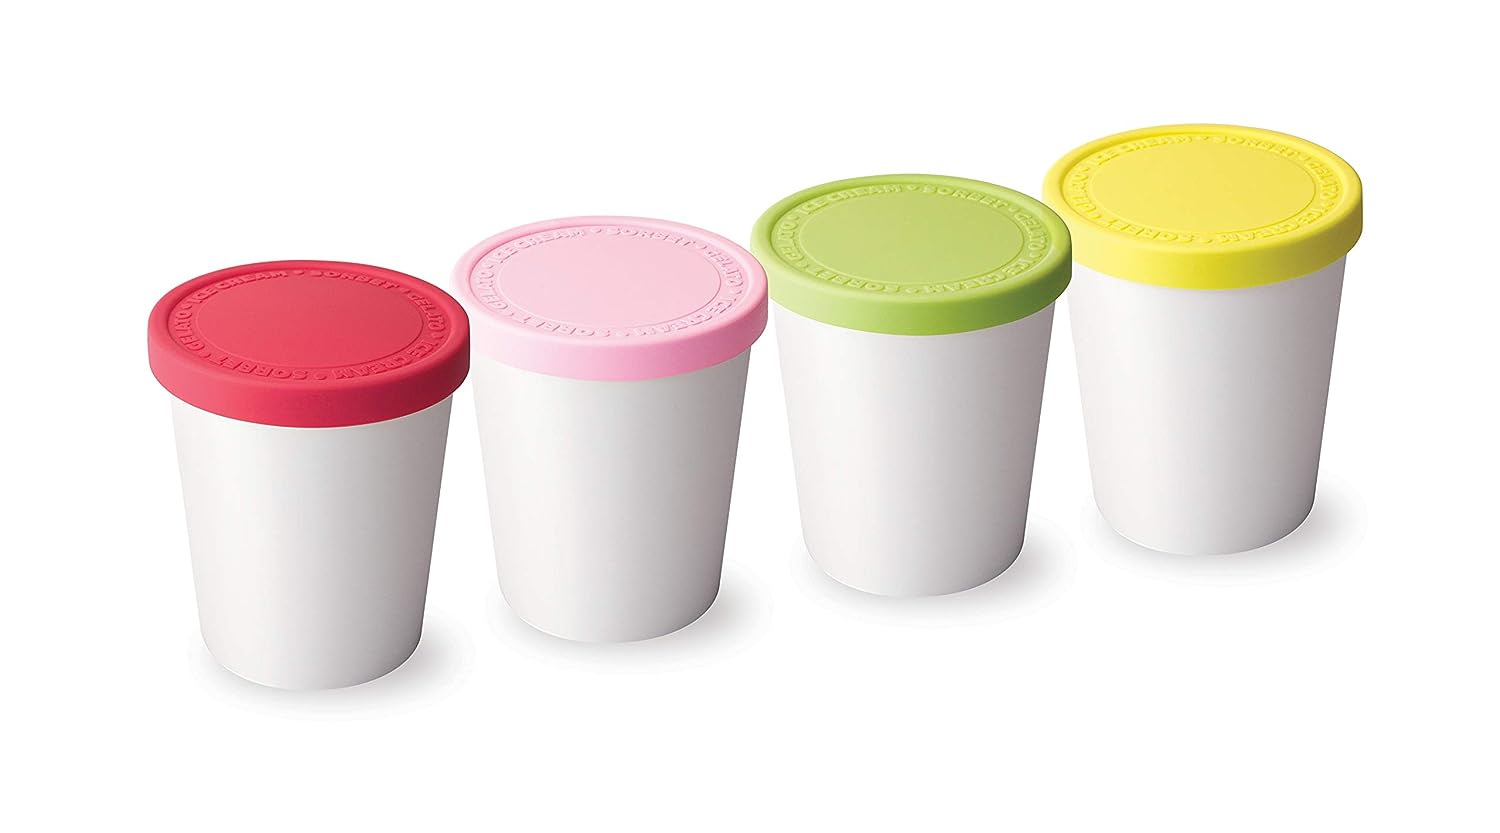 Set of 2 Reusable Ice Cream Tub Containers For Homemade Ice Cream 1.6 Quart  Ea. - Perfect for Sorbet, Frozen Yogurt Or Gelato - Stackable Storage  Containers, Stickers And Lids Stores Easily In Freezer 